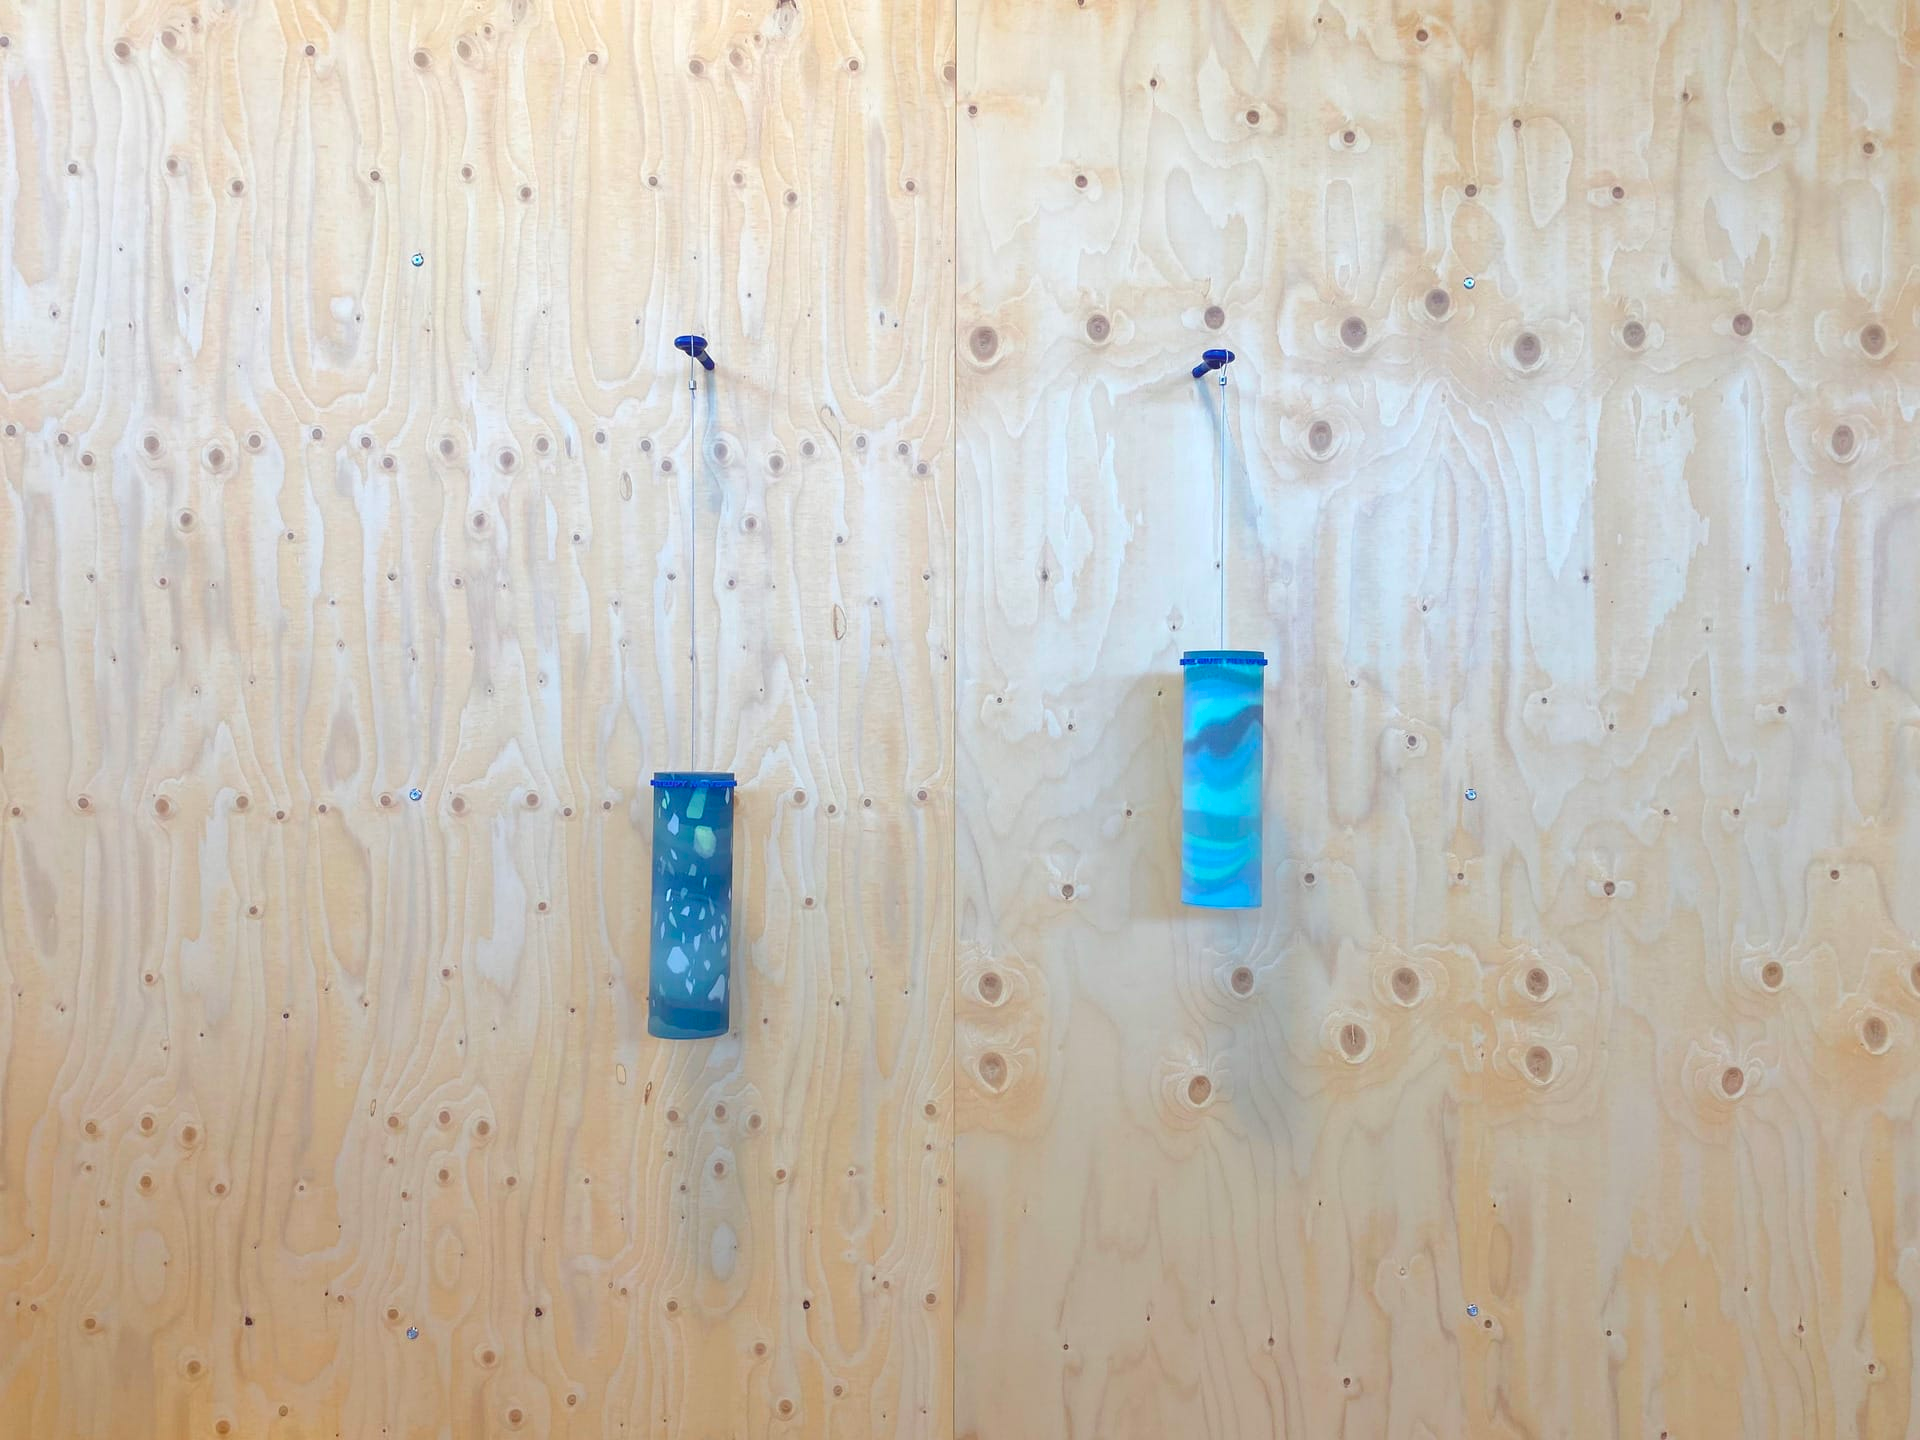 Image of two blue cylindrical objects hanging from string on a wooden wall.